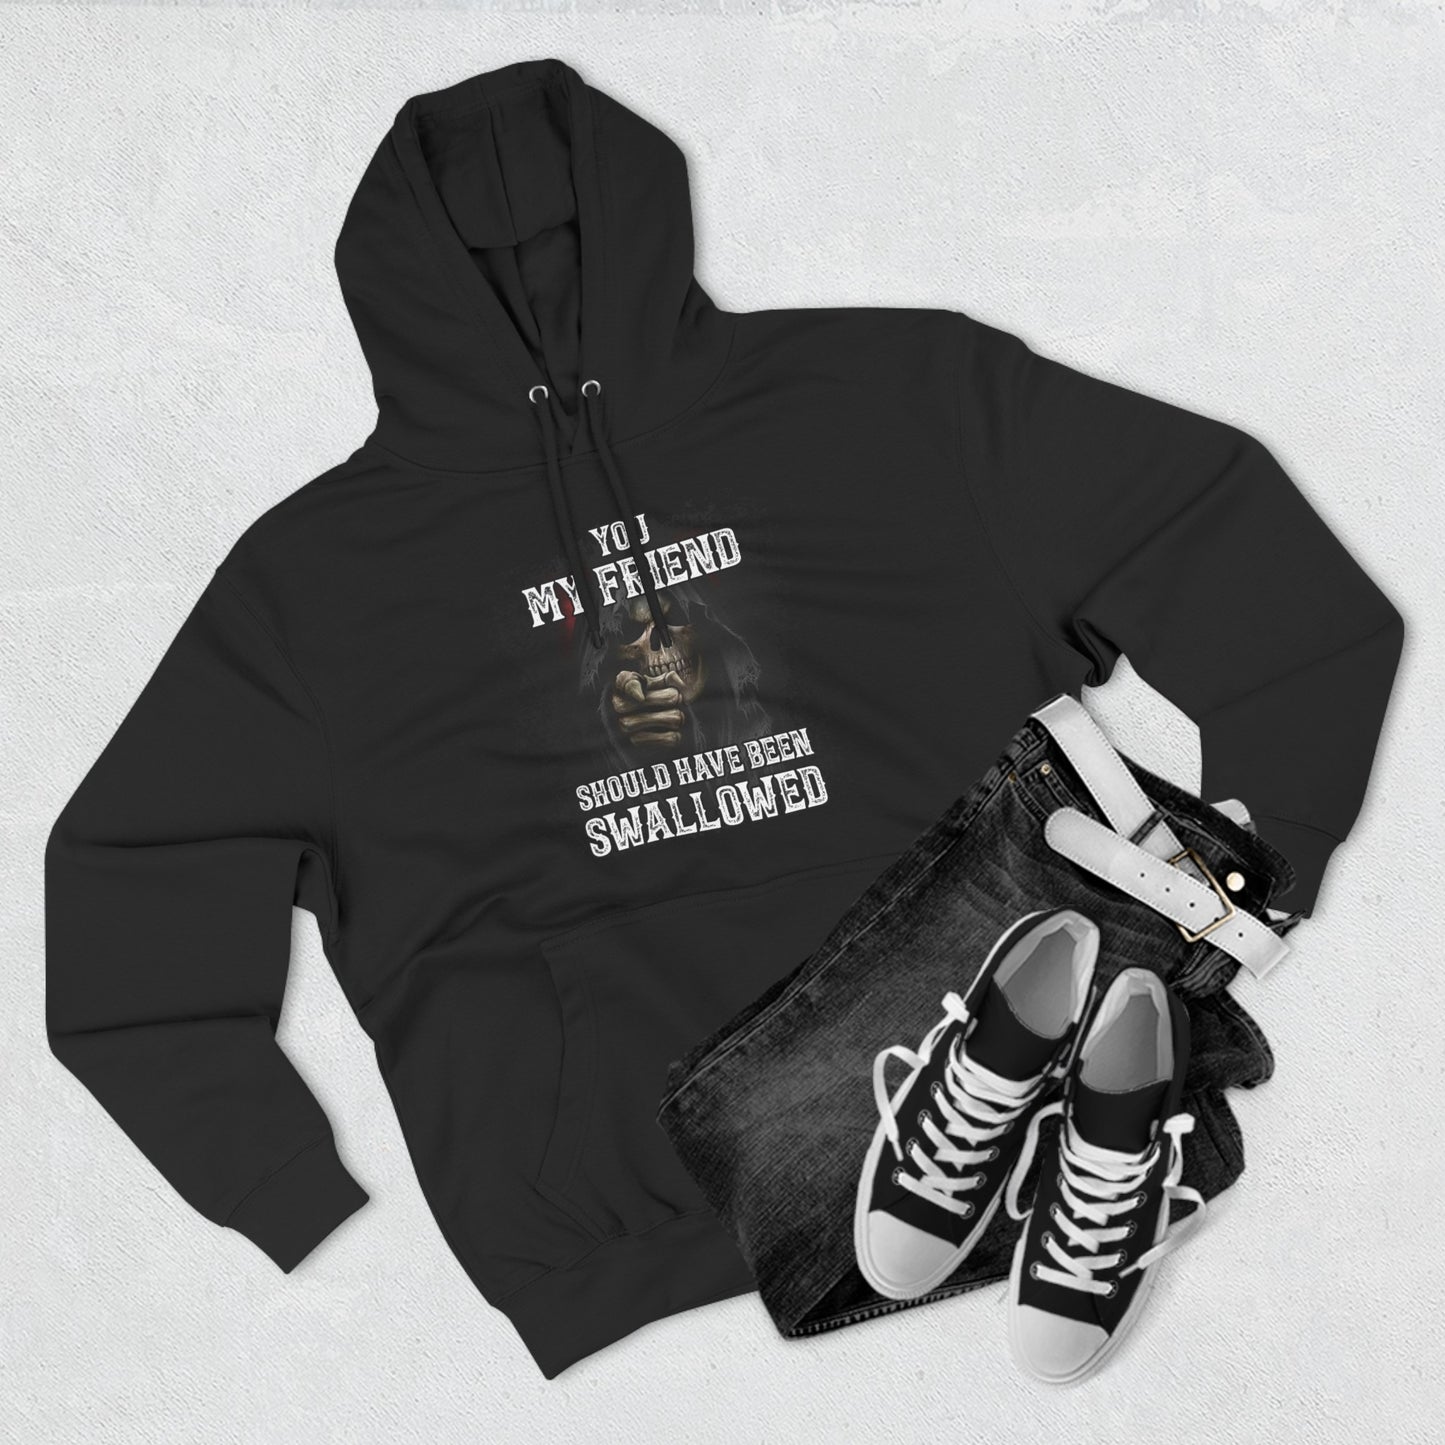 To You My Friend High Quality Unisex Heavy Blend™ Hoodie